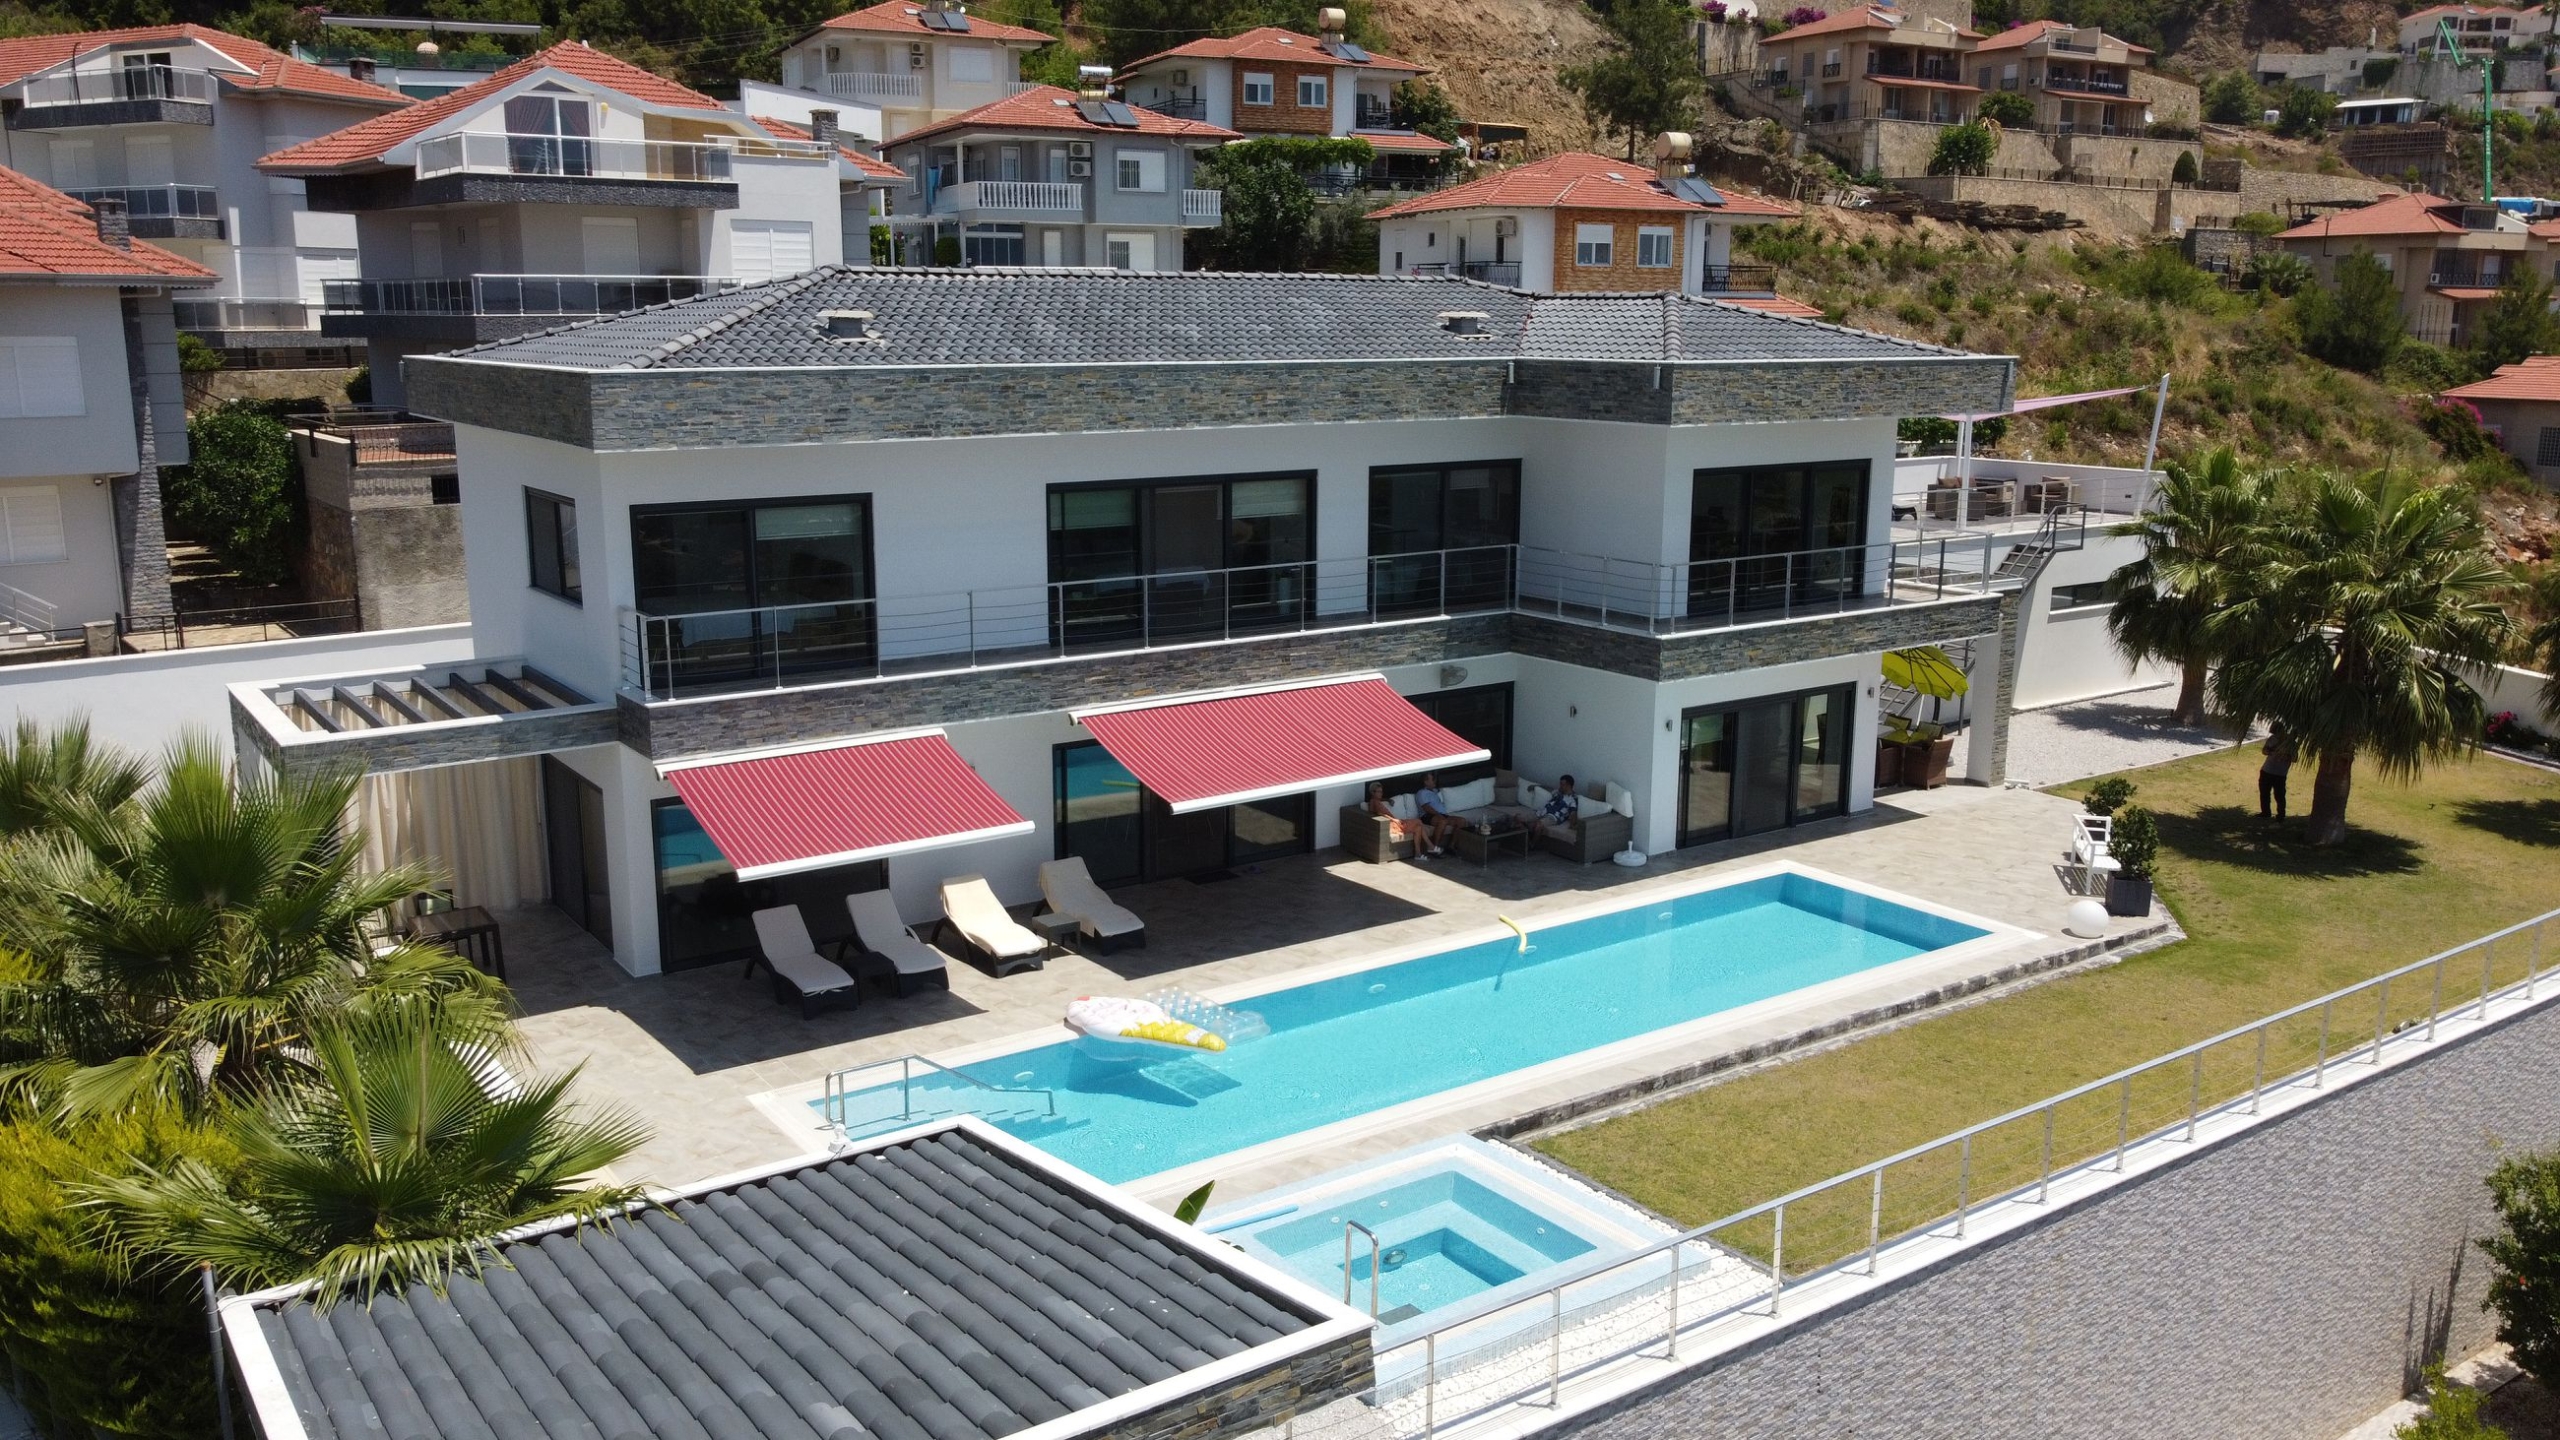 id994-two-storey-villa-41-with-private-pool-in-tepe-area-9-scaled.jpg